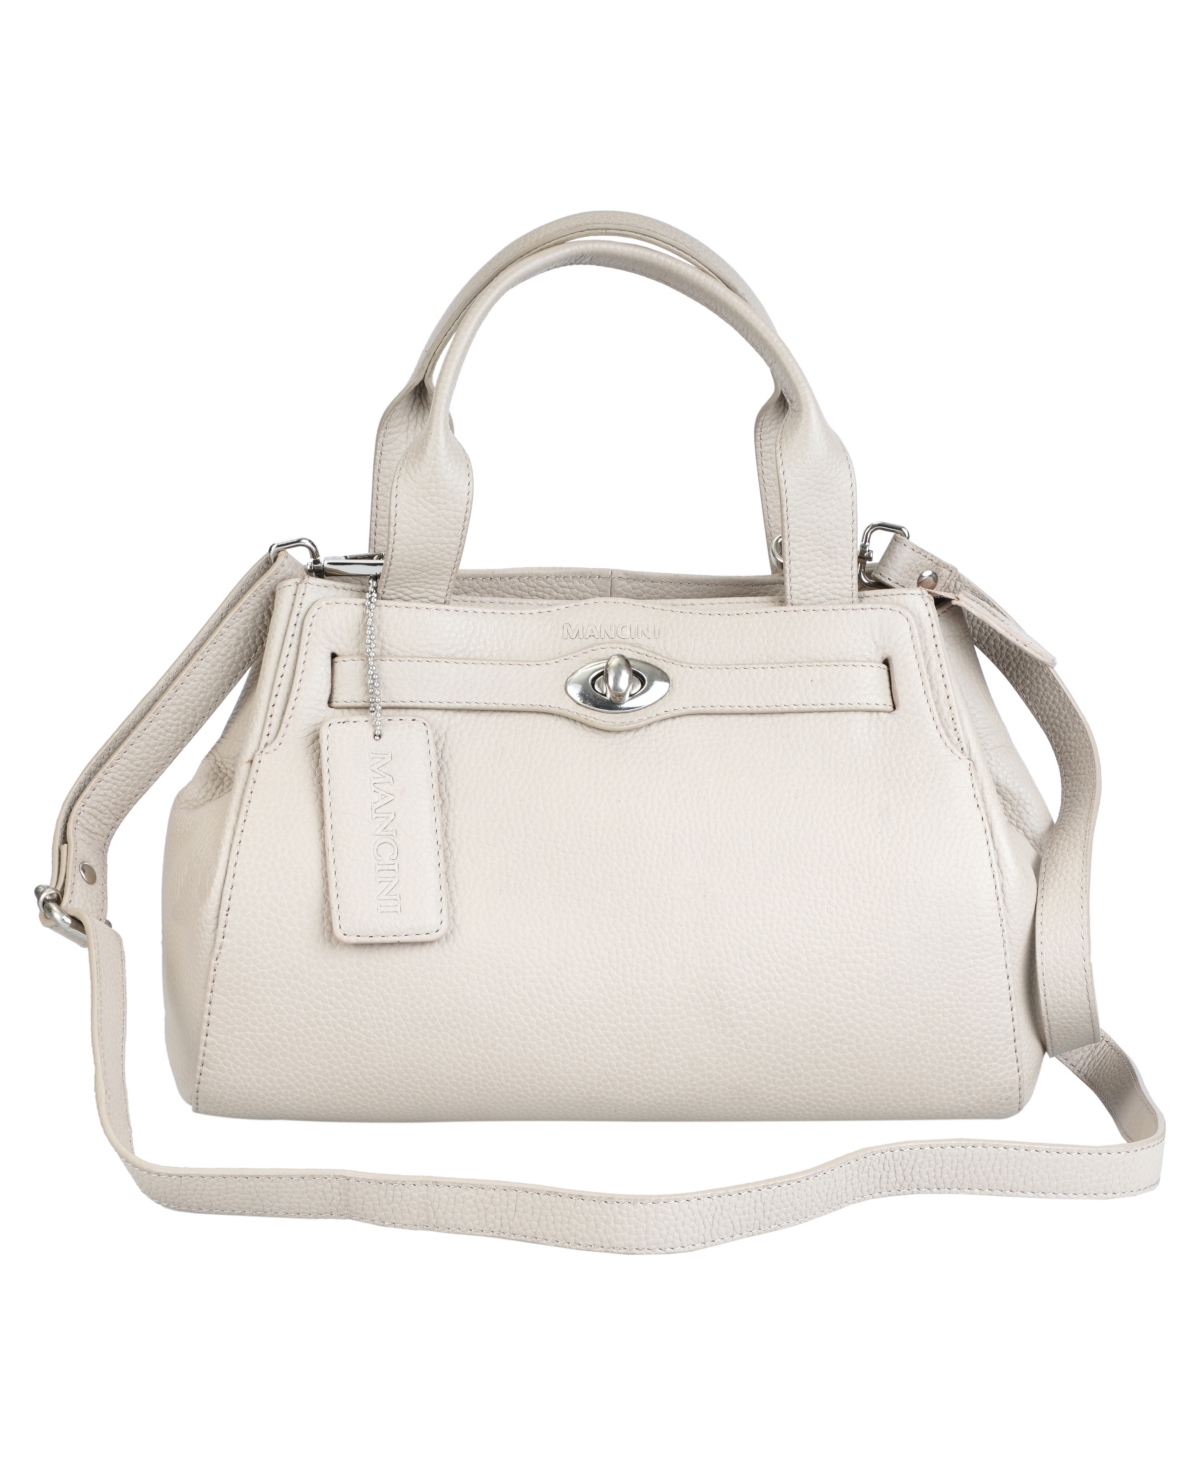 Mancini Pebbled Collection Genevieve Leather Top Zipper Handbag In Taupe